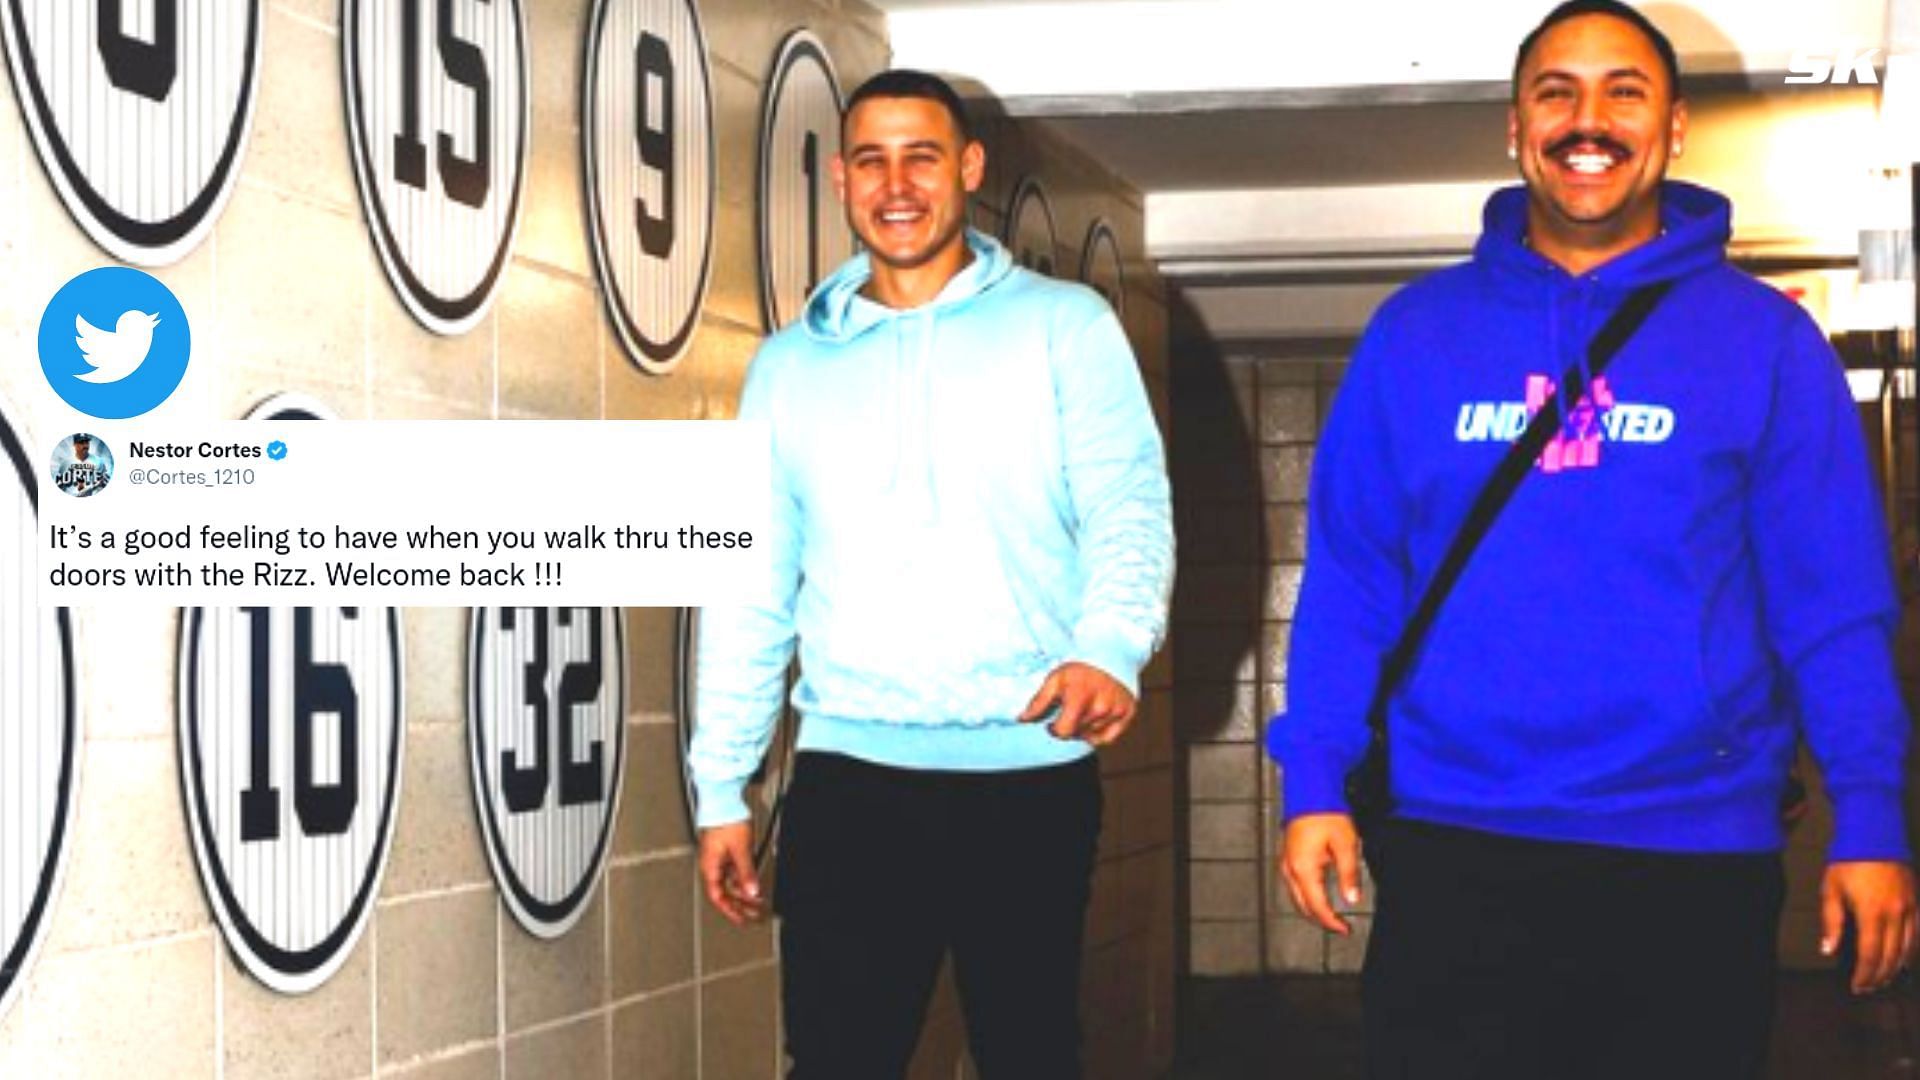 New York Yankees pitcher Nestor Cortes with his fellow teammate Anthony Rizzo.